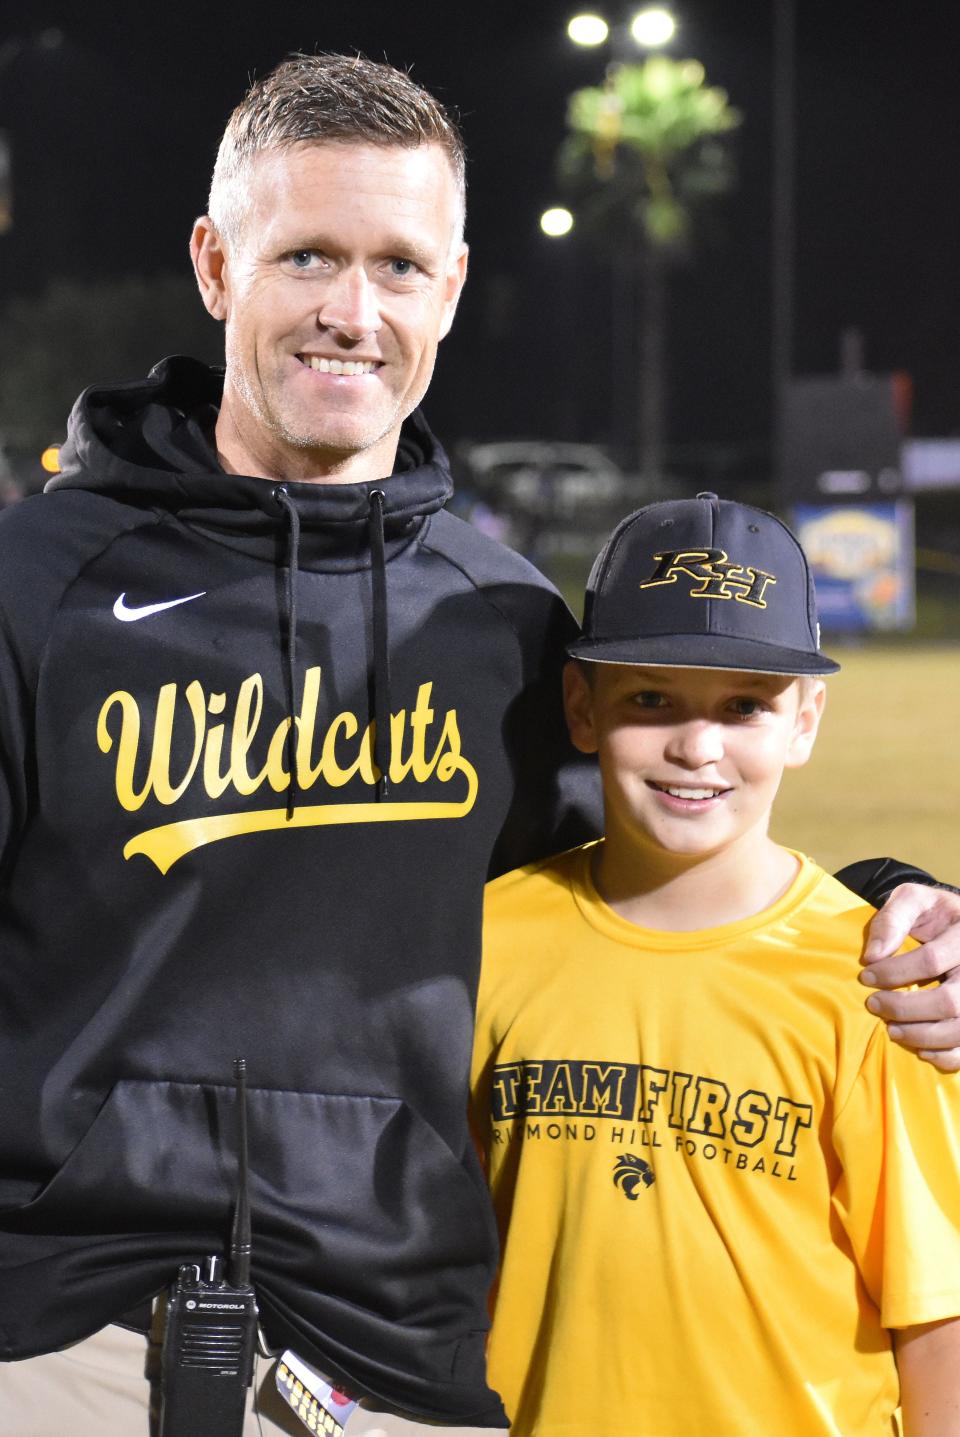 Stacy Bennett, shown with his son Brody following a Richmond Hill High School football game in fall 2021, is the new athletic director for the Wildcats.